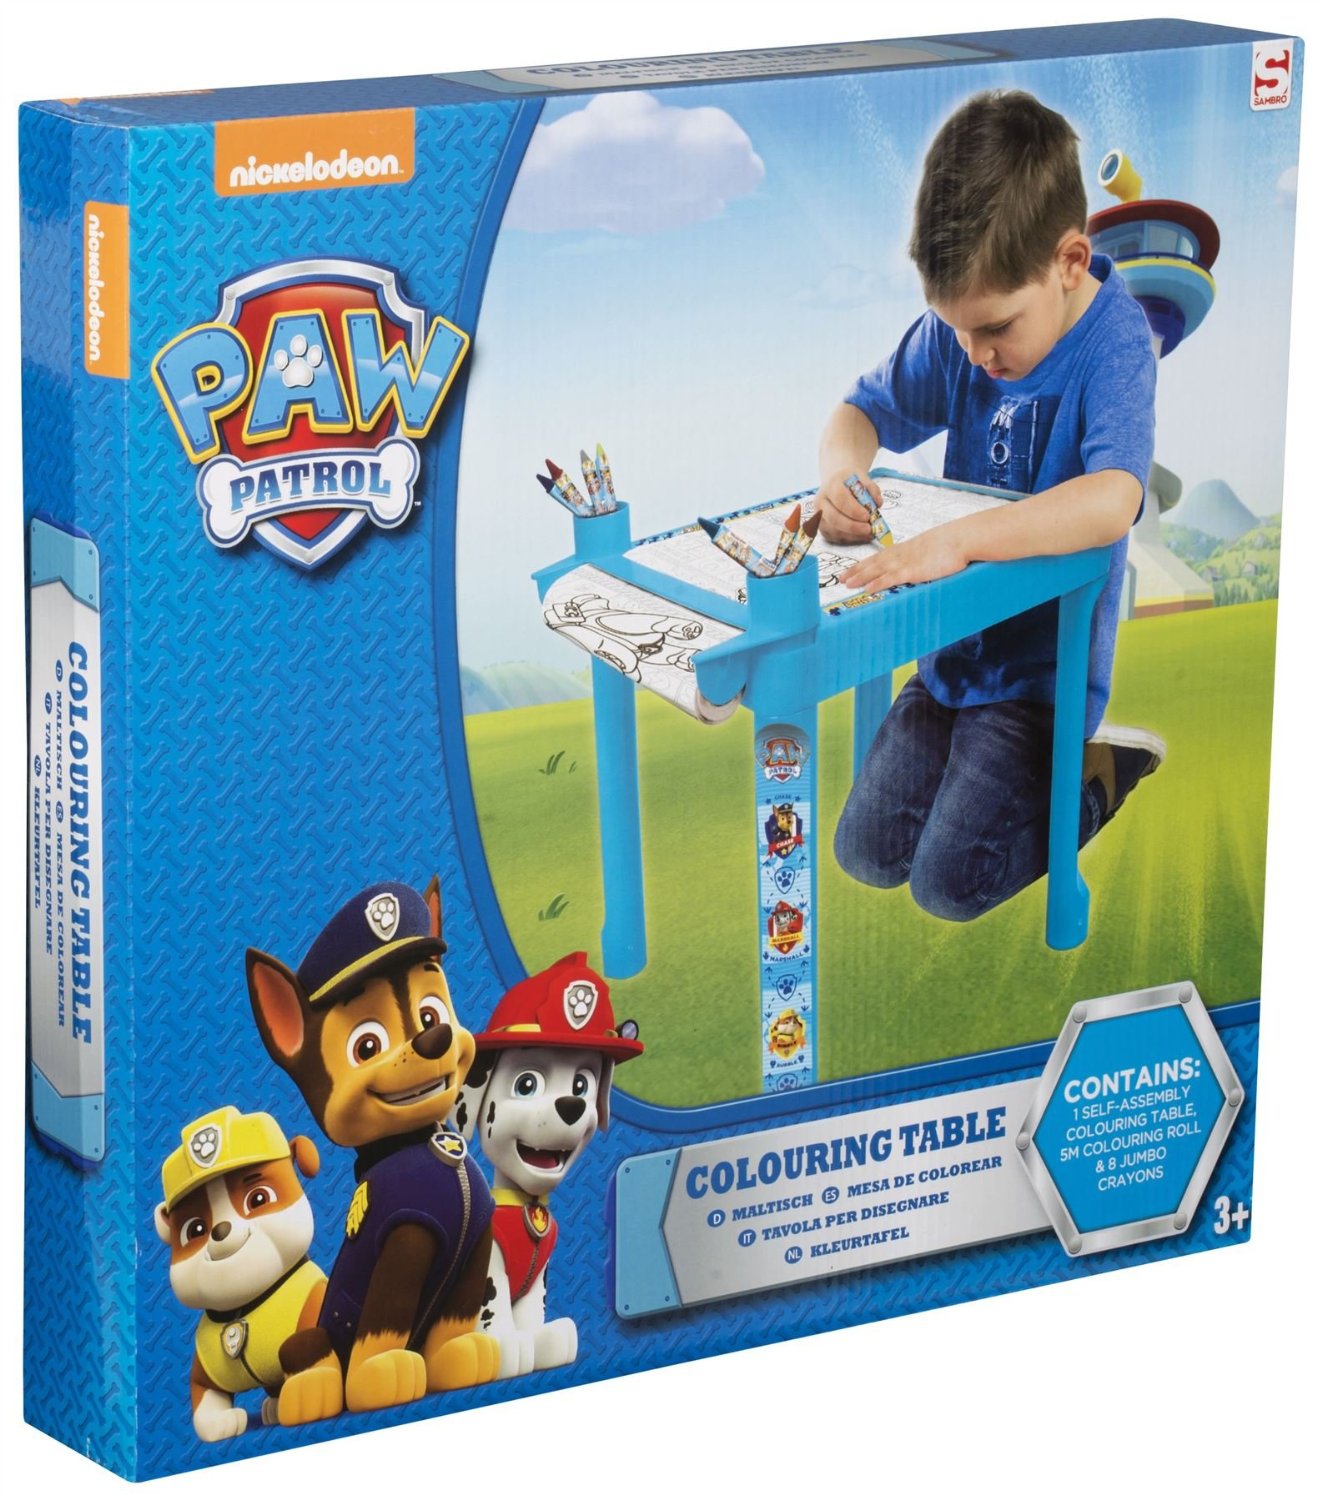 Nickelodeon Paw Patrol Colouring Table Stationery